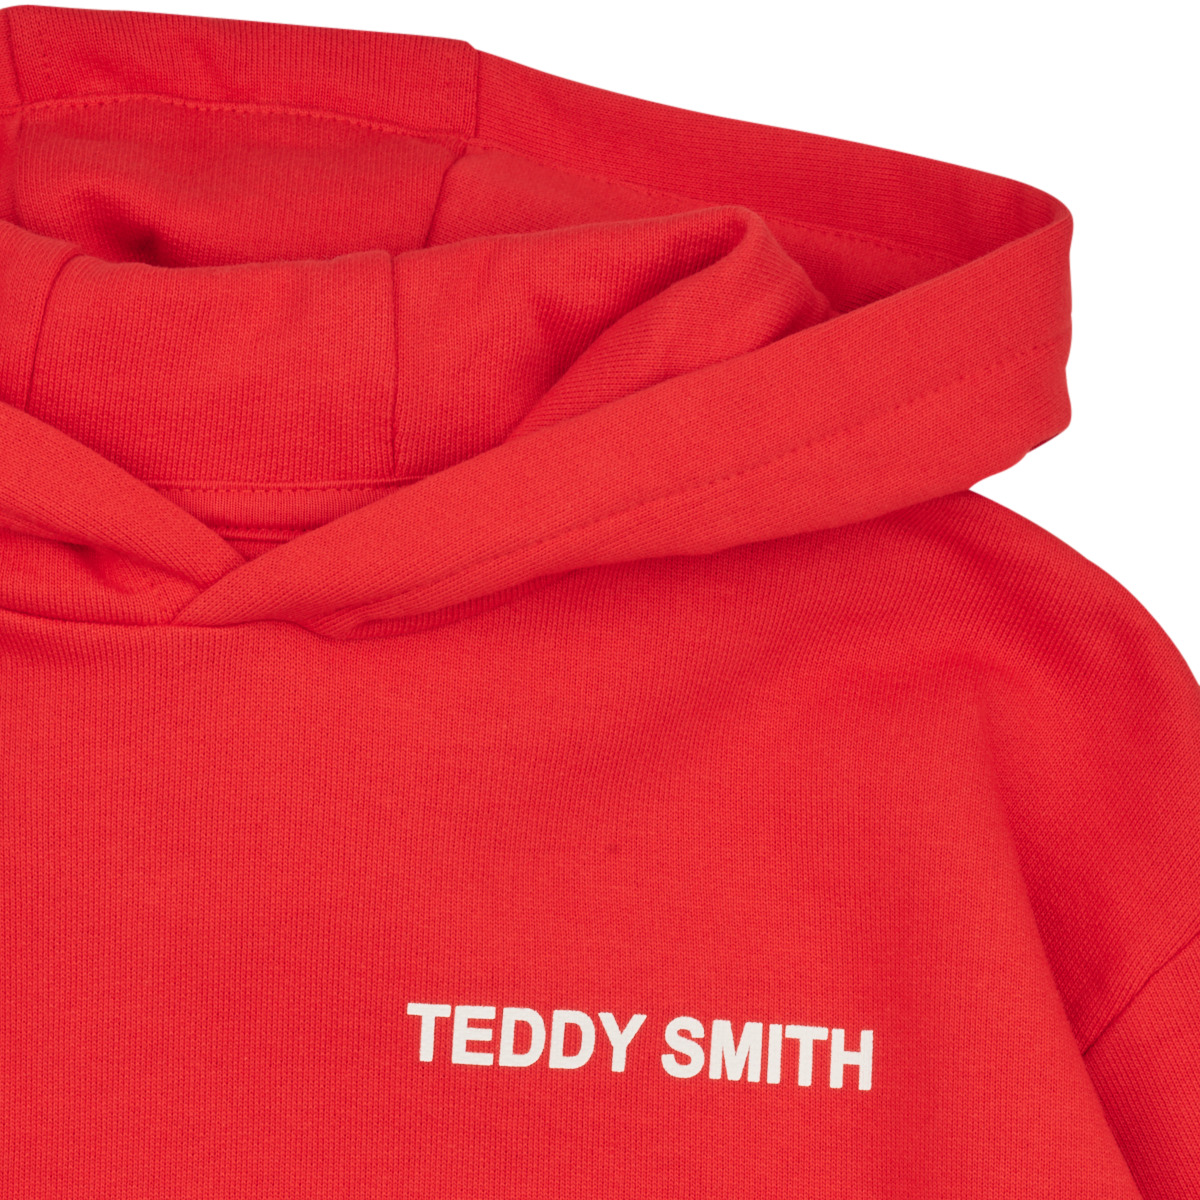 Teddy Smith Rose S-REQUIRED G JR RapNlTCE